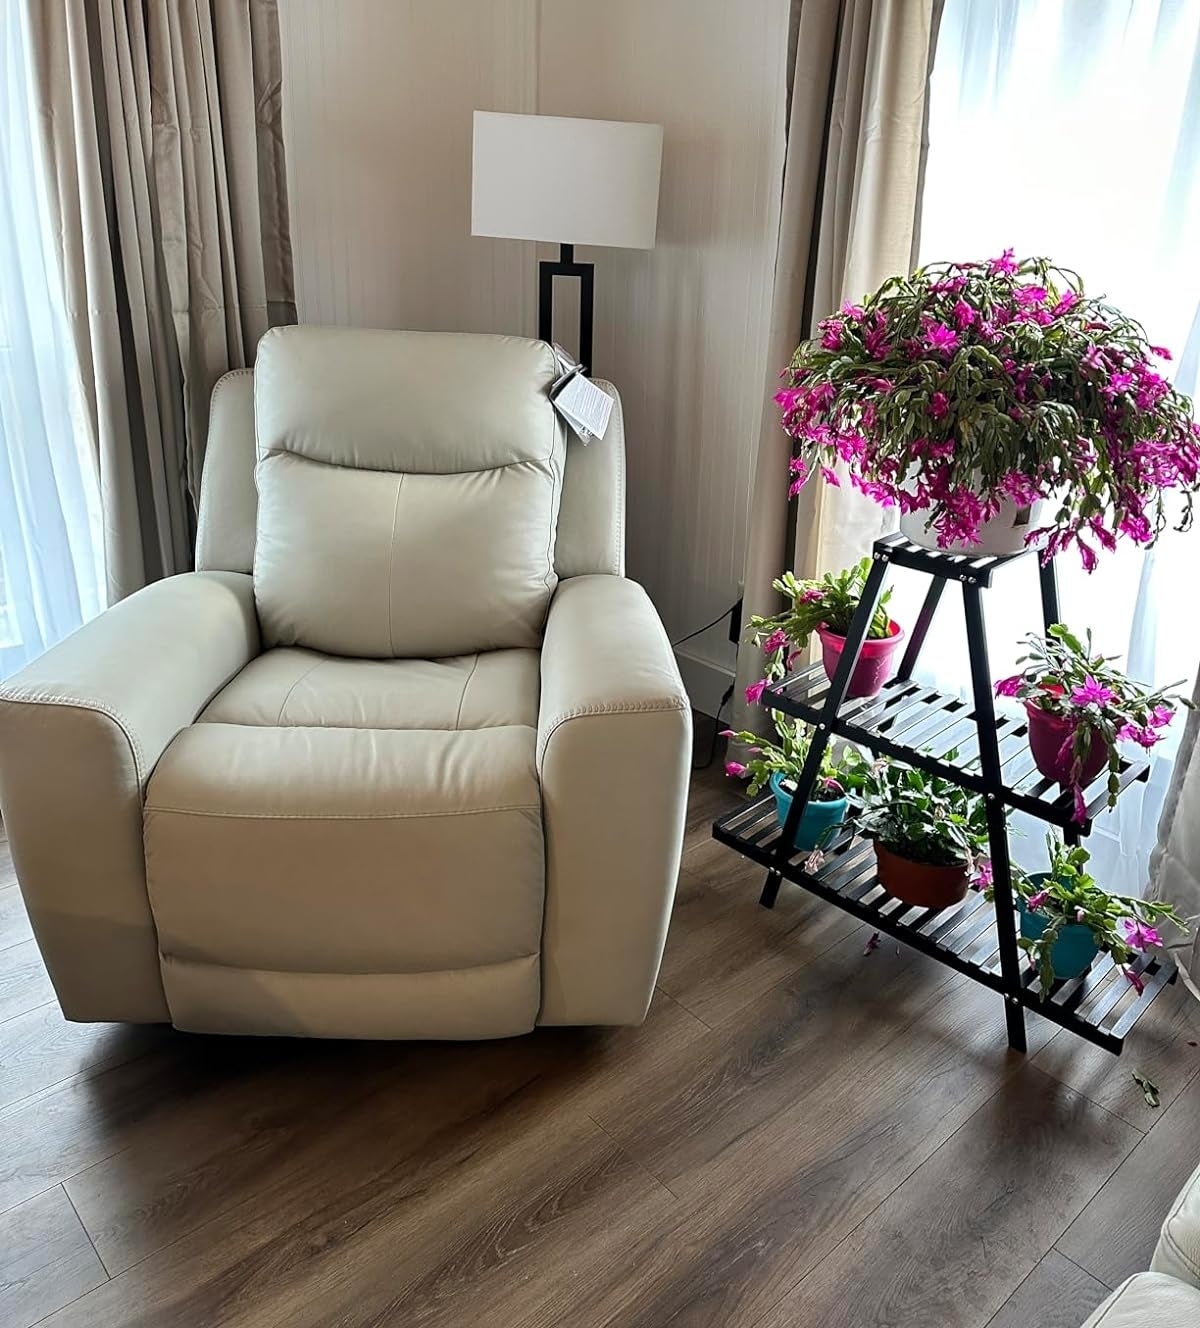 Comfortable beige recliner chair near a window with a plant on a multi-tiered stand, ideal for a cozy reading corner